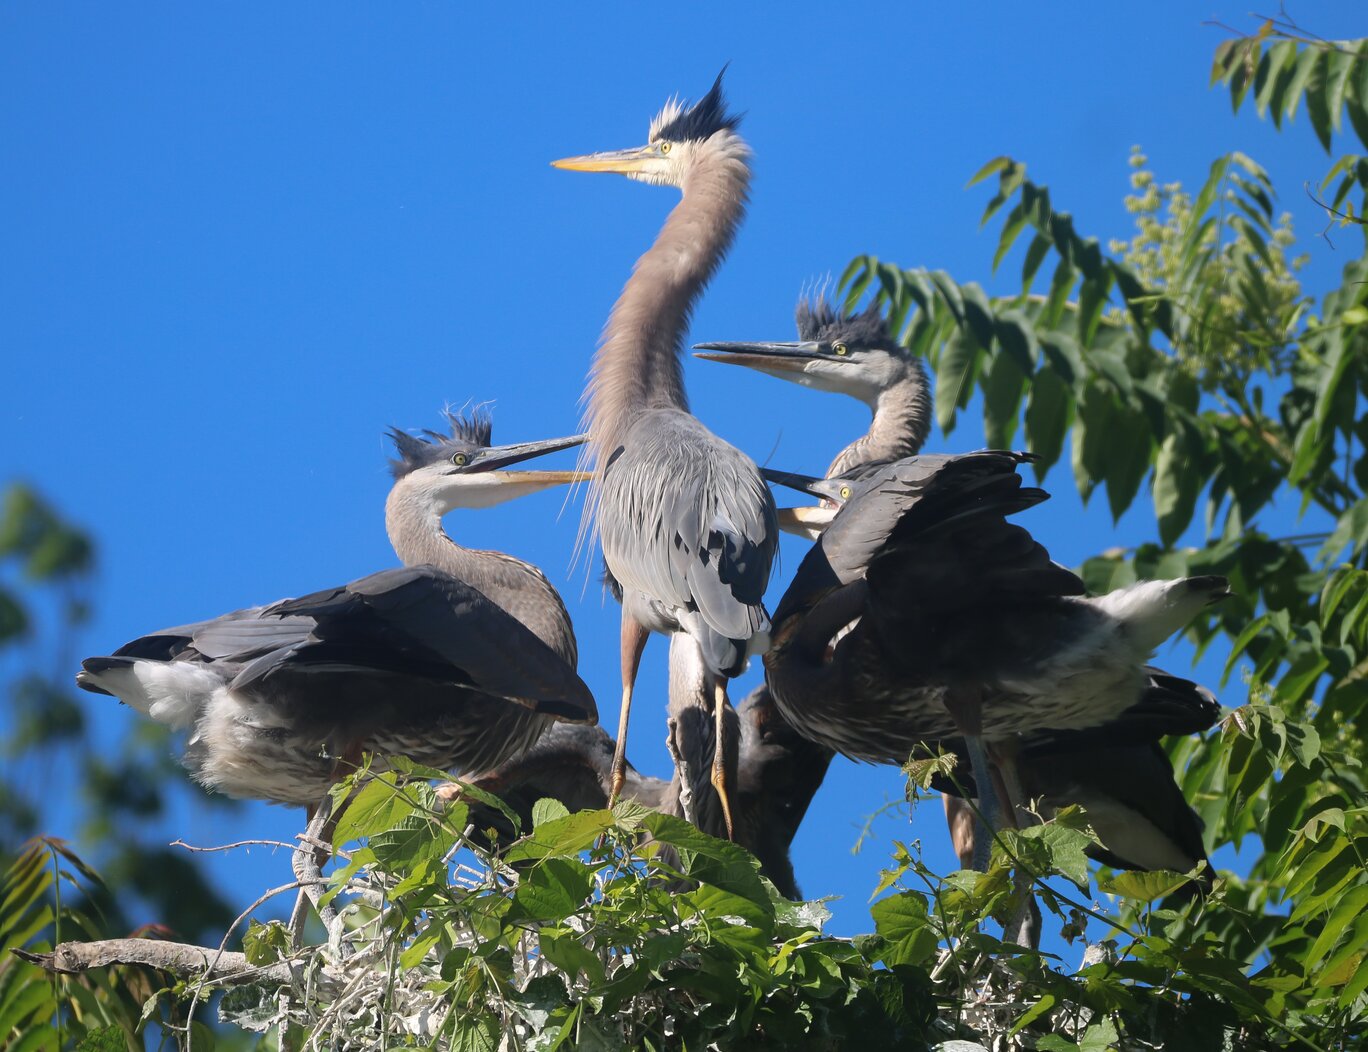 Great Blue Heron nestlings beg to be fed in Clove Lakes Park. Photo: Dave Ostapiuk